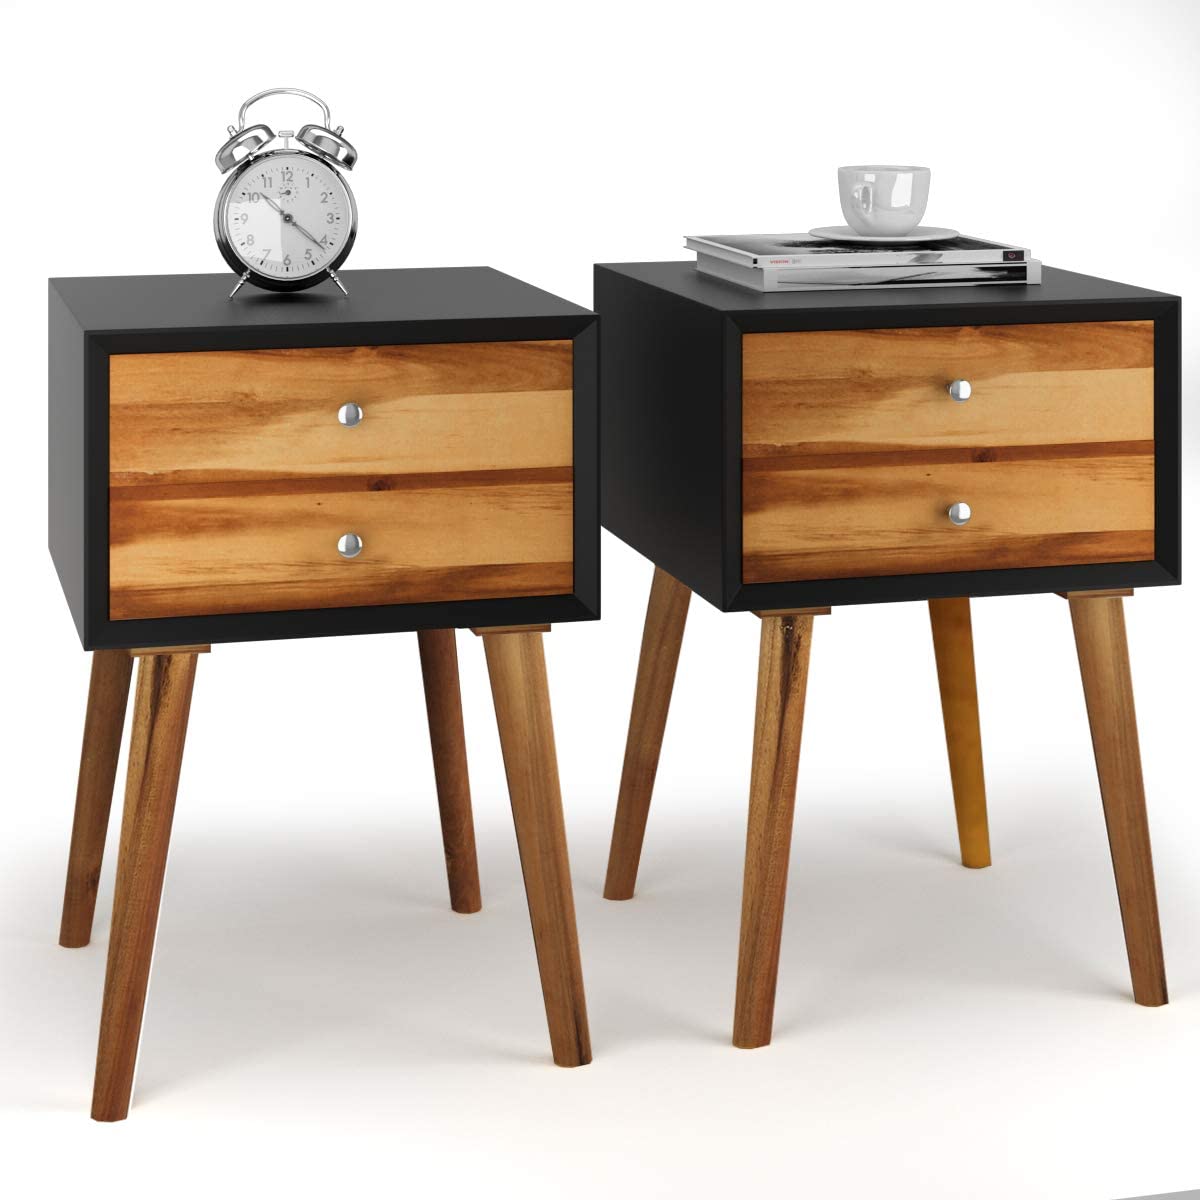 Giantex Scratch-Resistant Finish Wooden Bedside Tables, 2-Pack